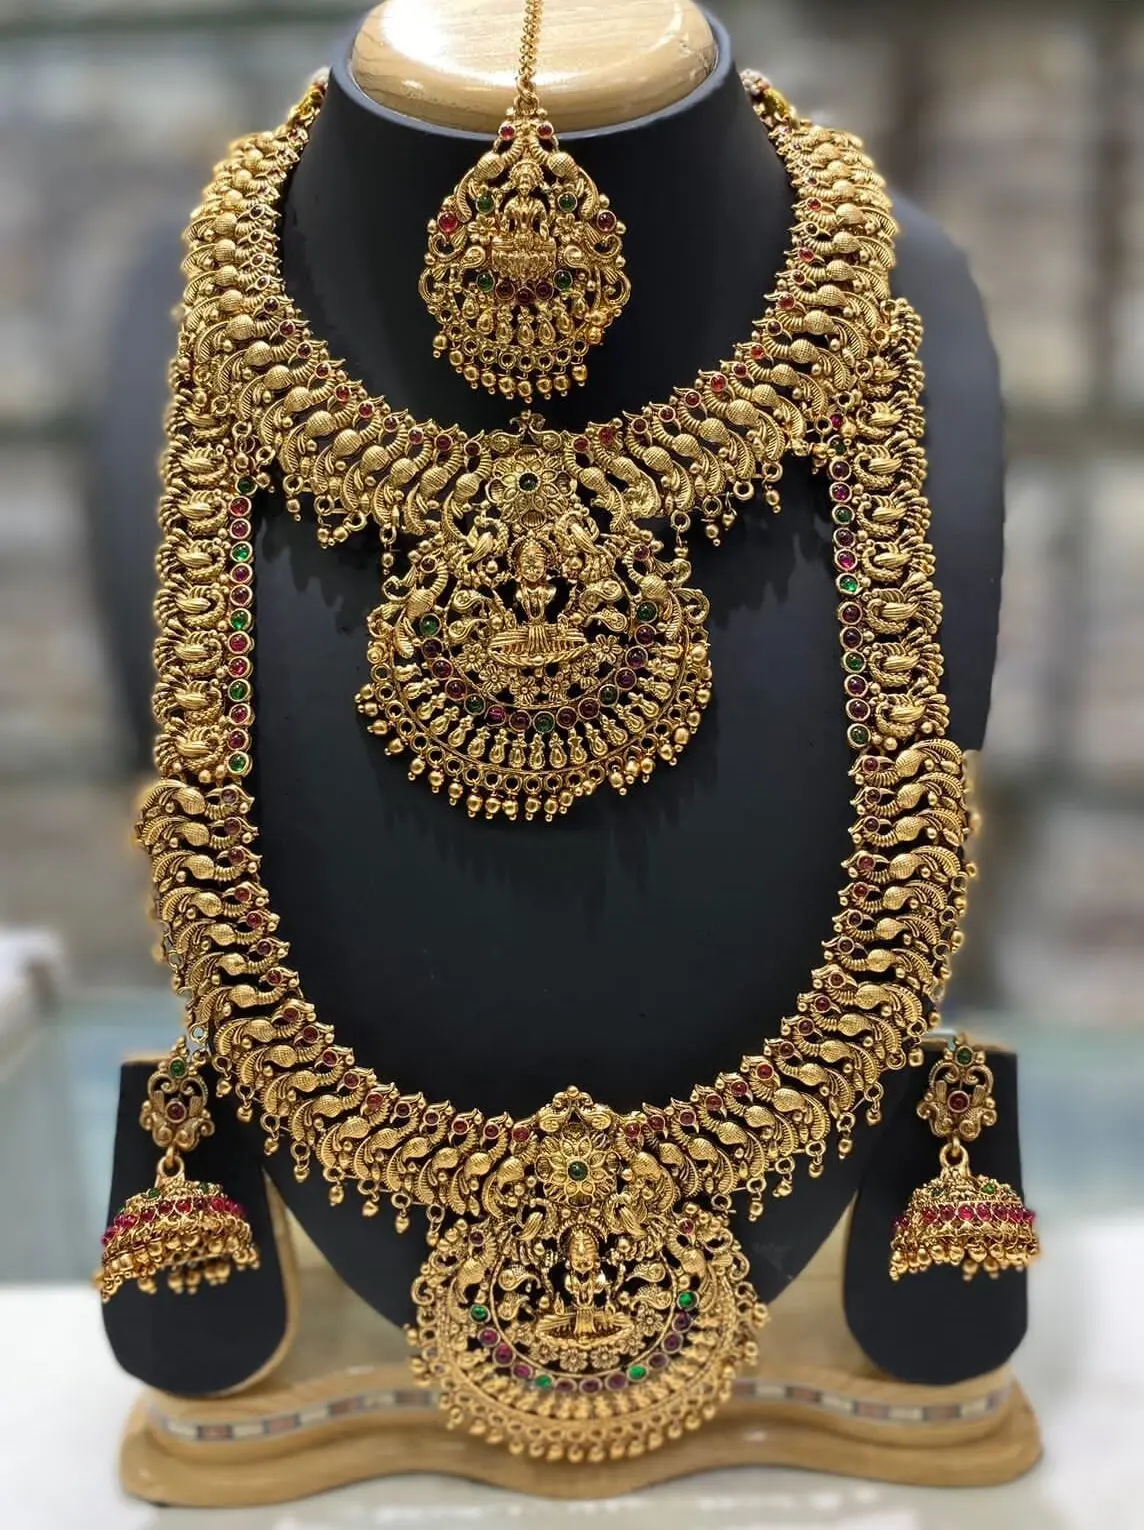 Temple Jewellery Divine Adornment Steeped in Tradition (1)